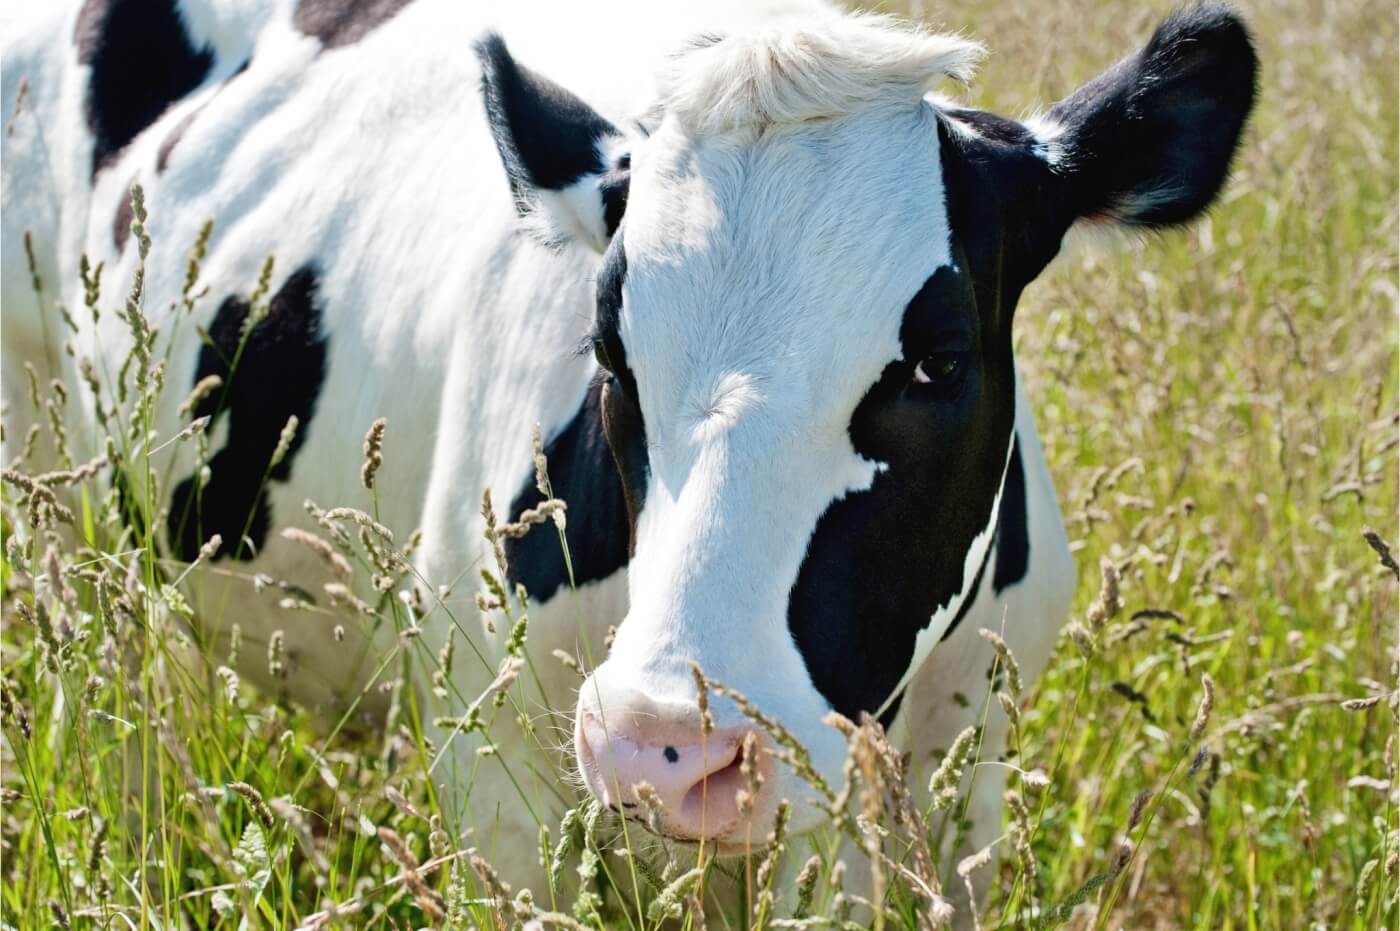 A black and white cow stands in a field of grass